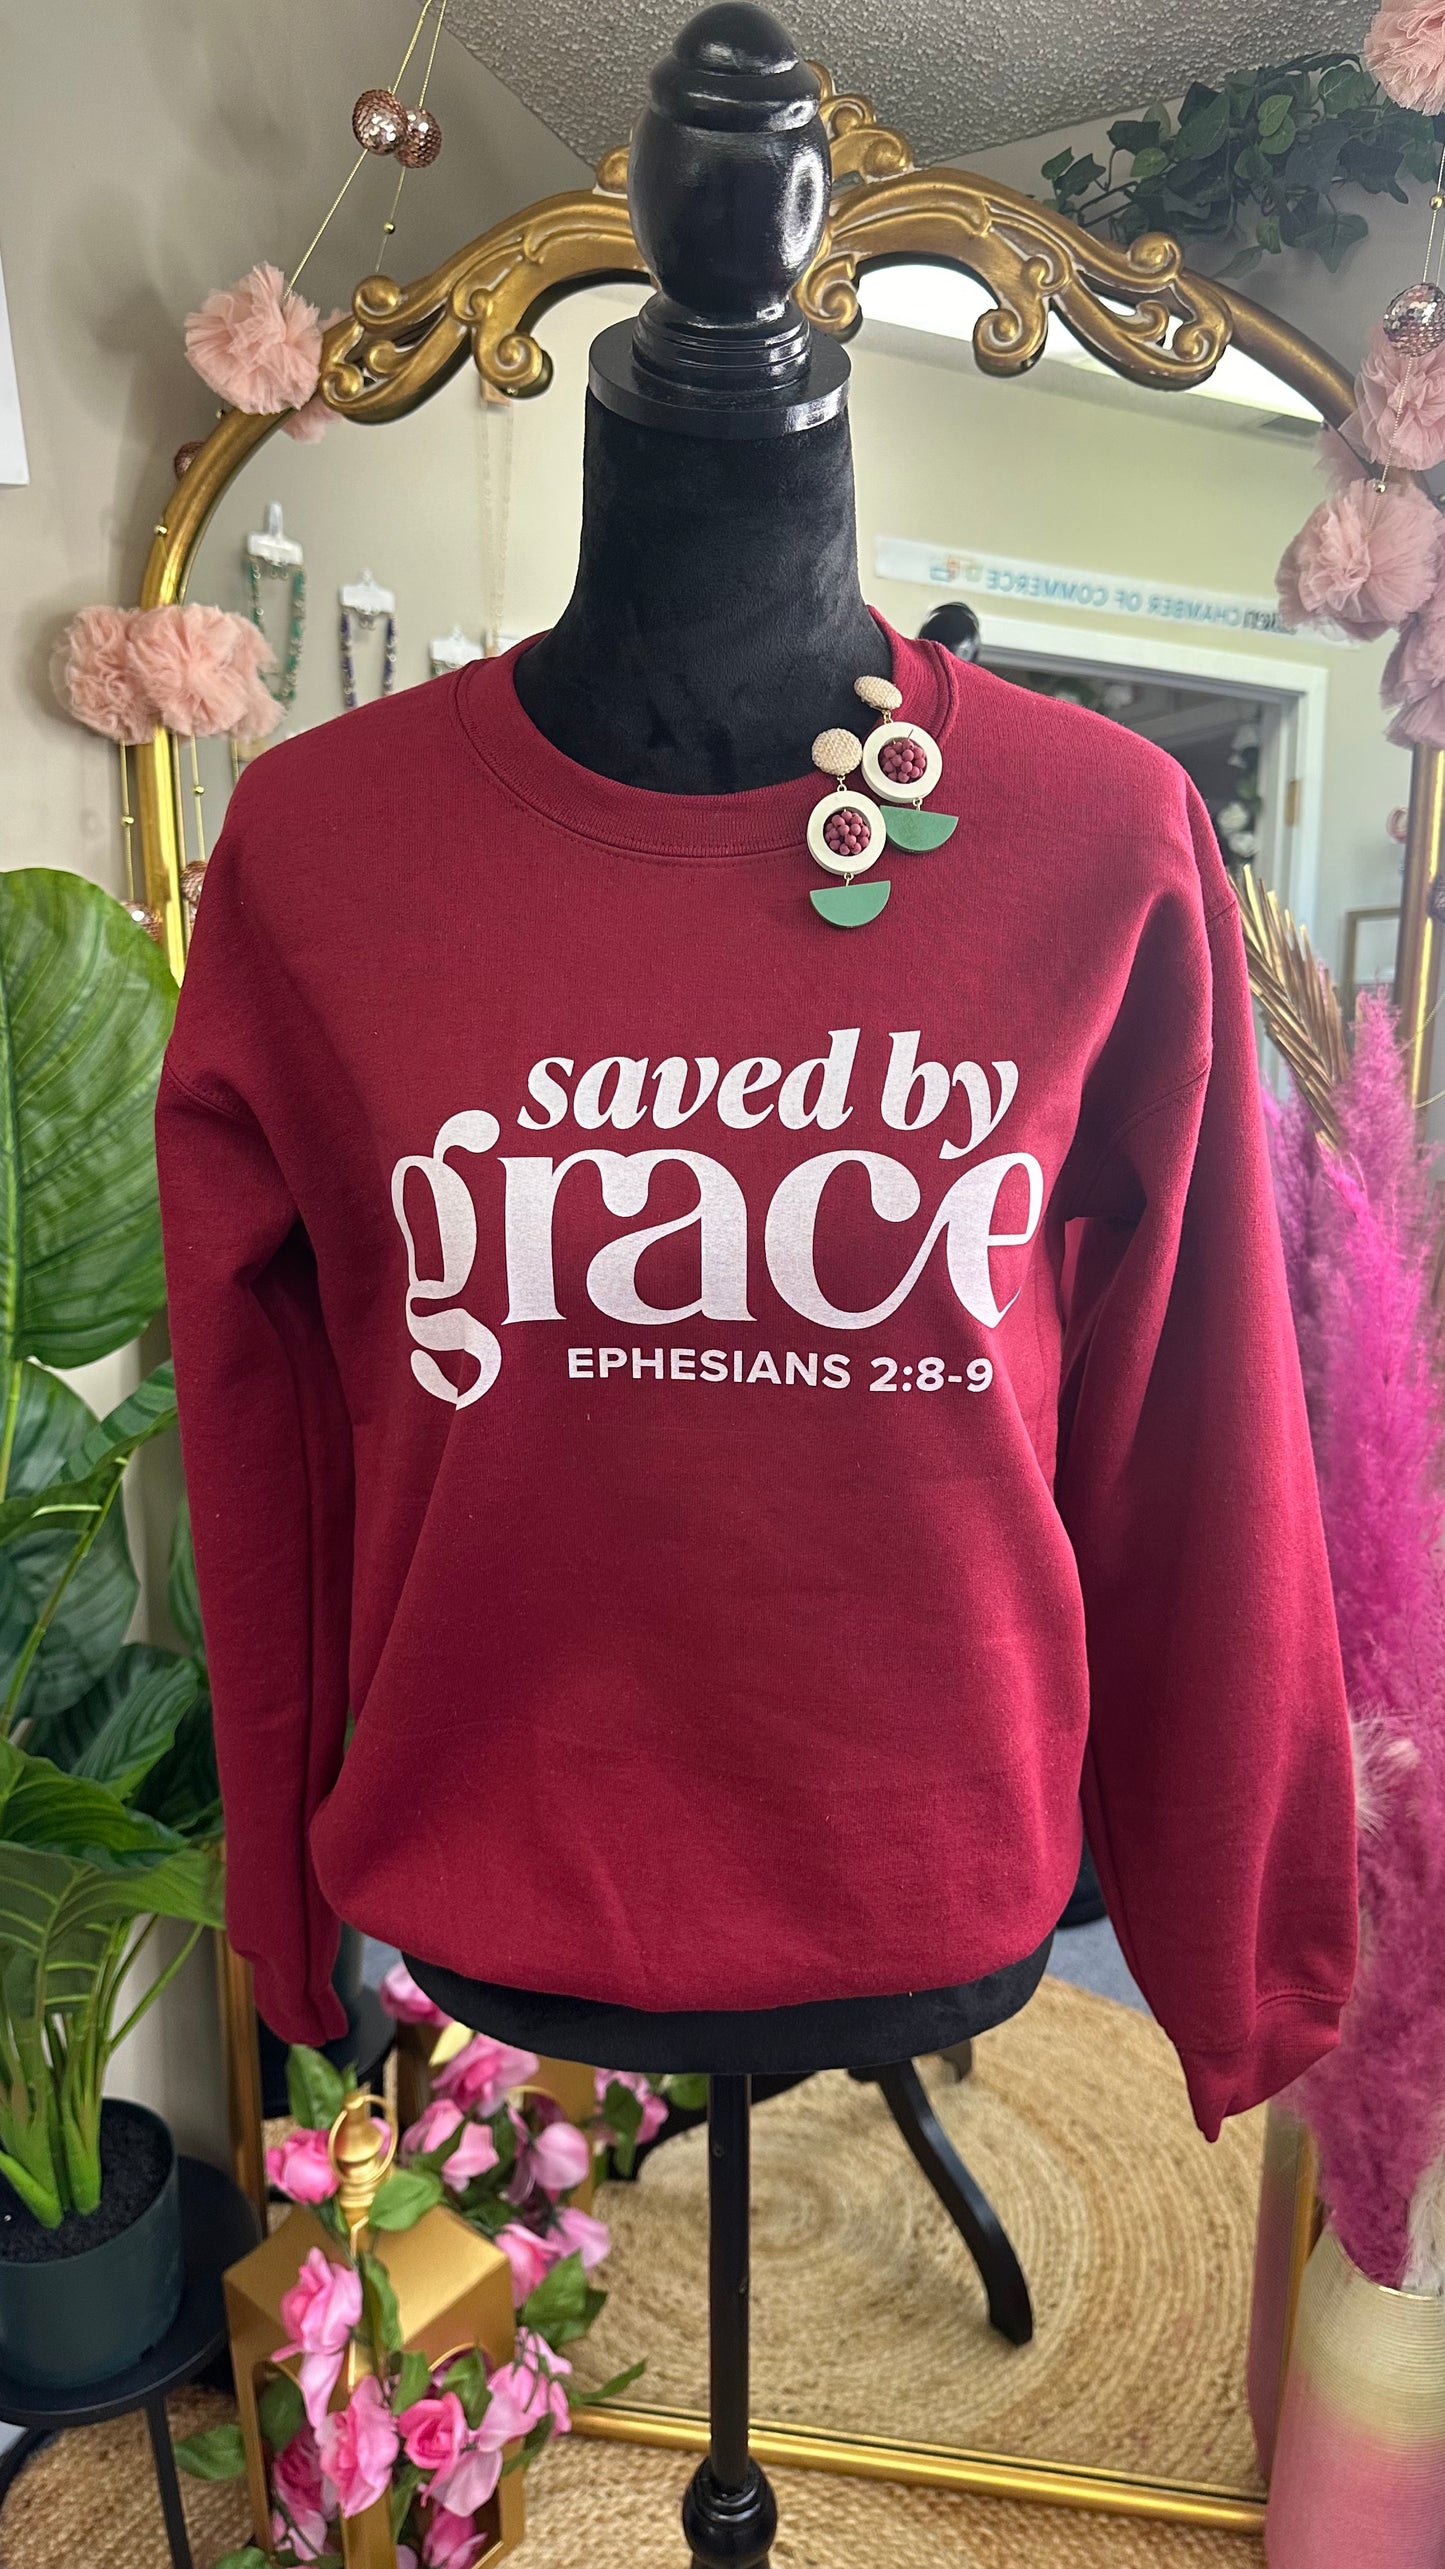 The Saved By Grace Sweatshirt